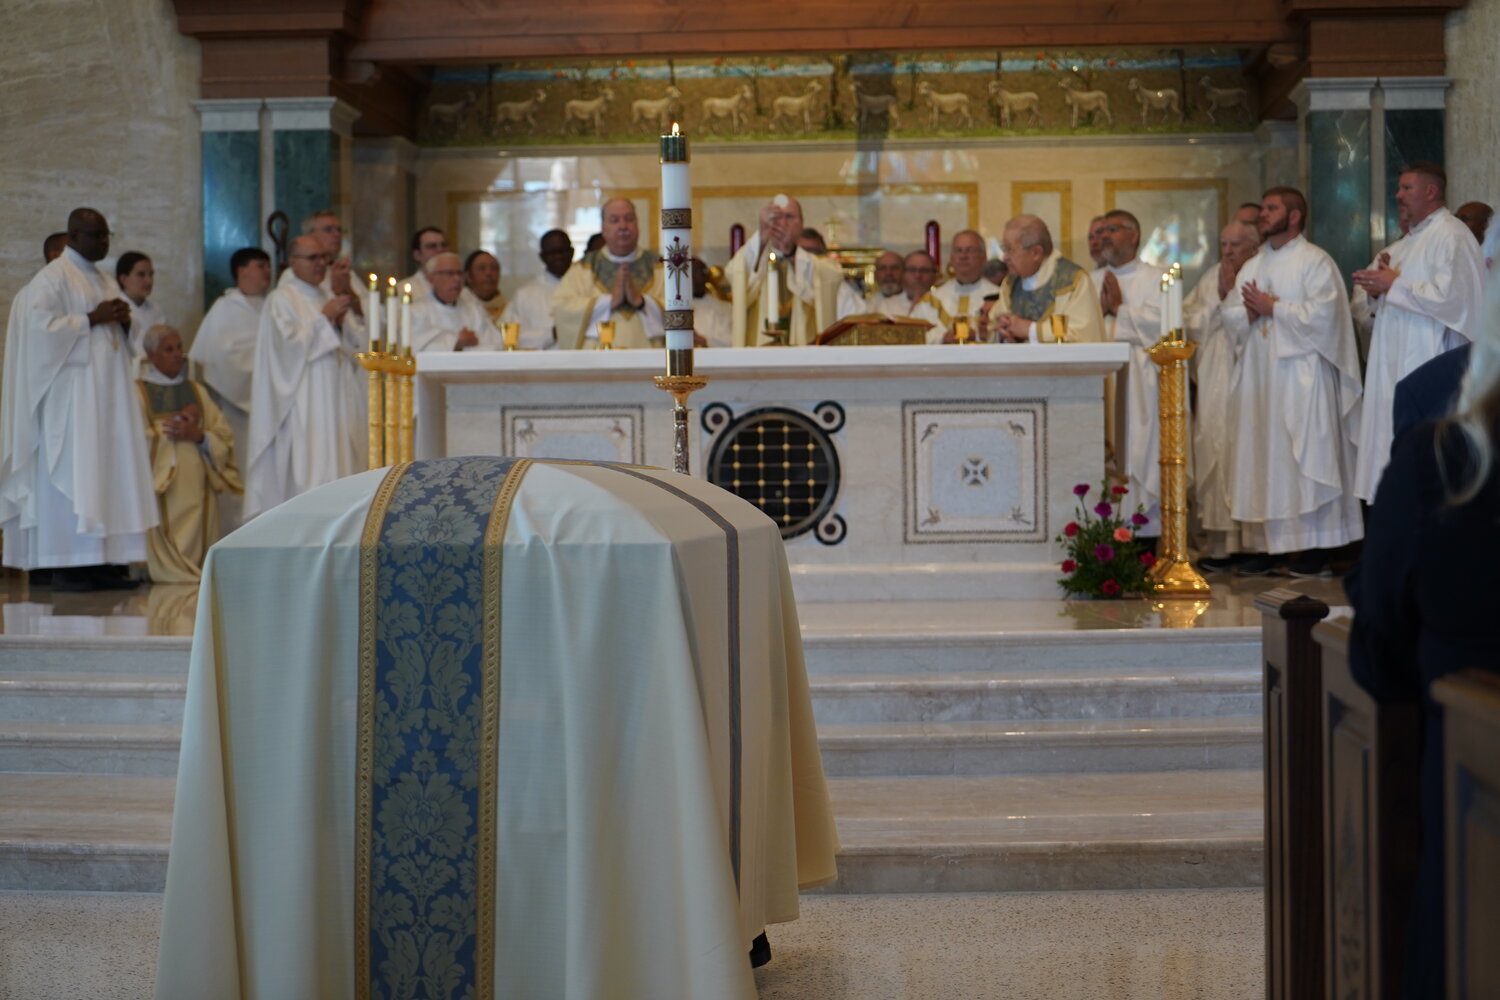 Bishop W. Shawn McKnight, Bishop Emeritus John R. Gaydos and priests of the Jefferson City diocese celebrate the Mass of Christian Burial for Monsignor Michael Wilbers on Sept. 26 in the Cathedral of St. Joseph.